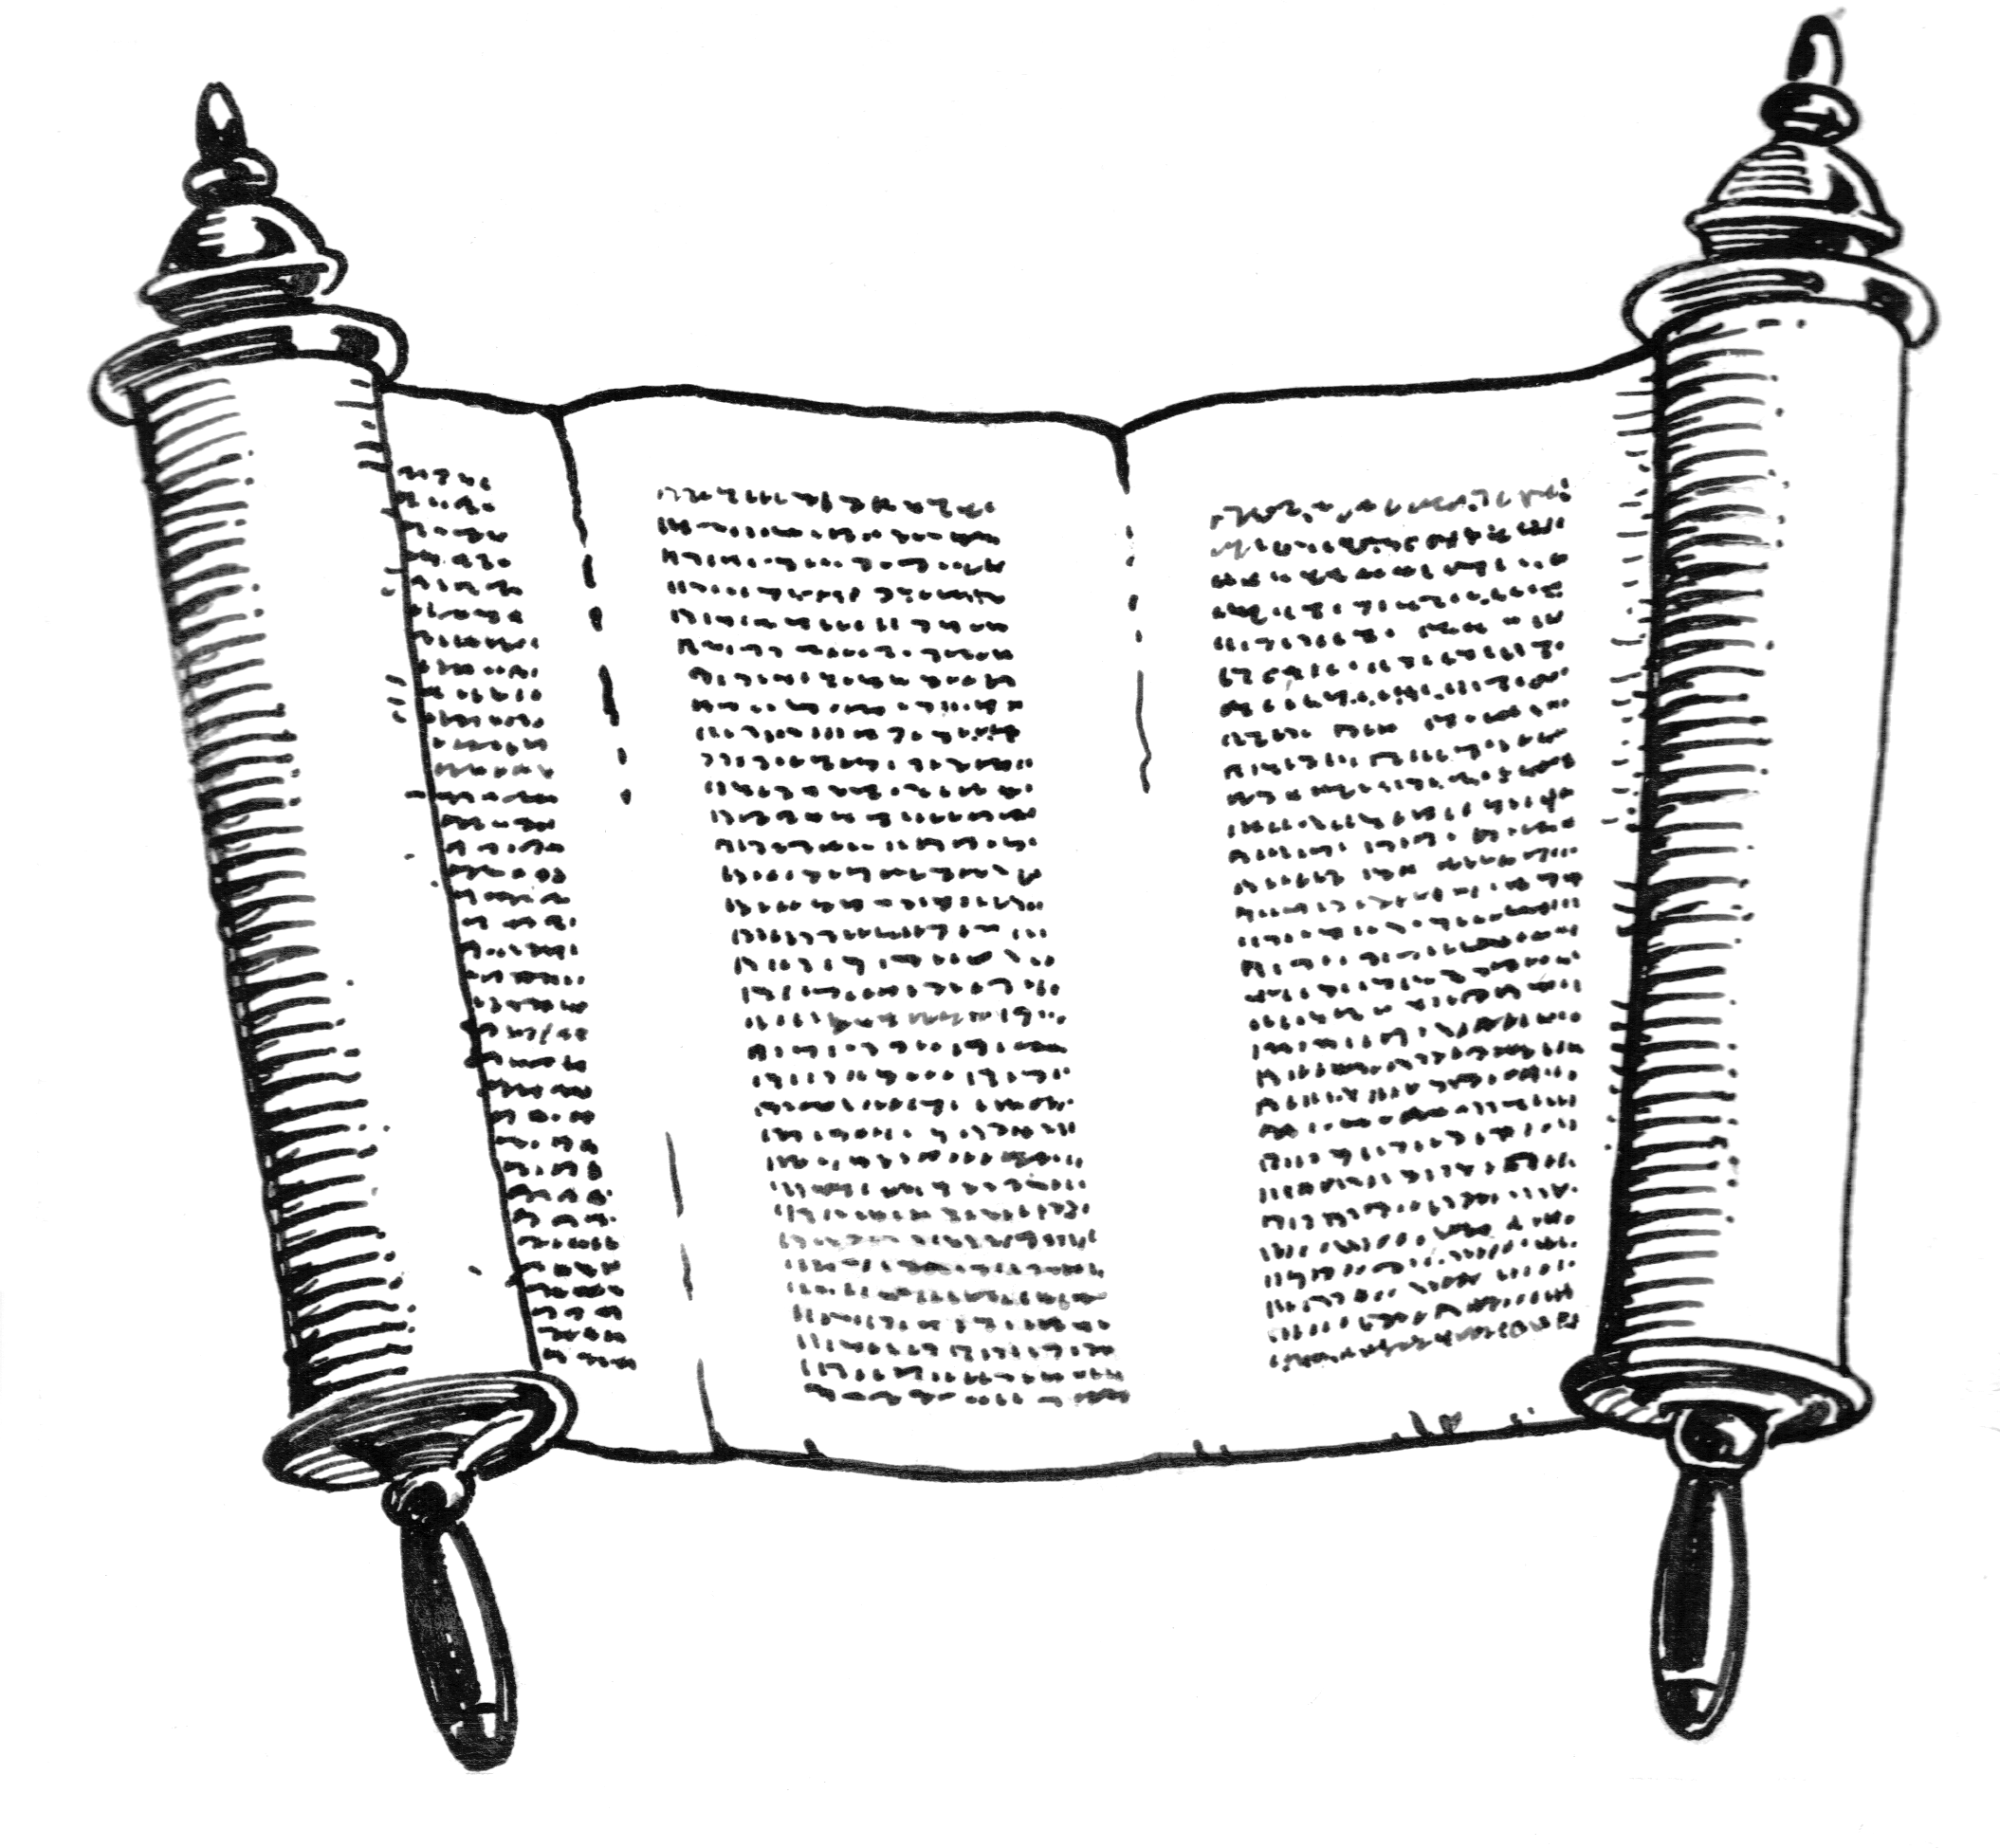 File:PSF-scroll.png - Wikimedia Commons